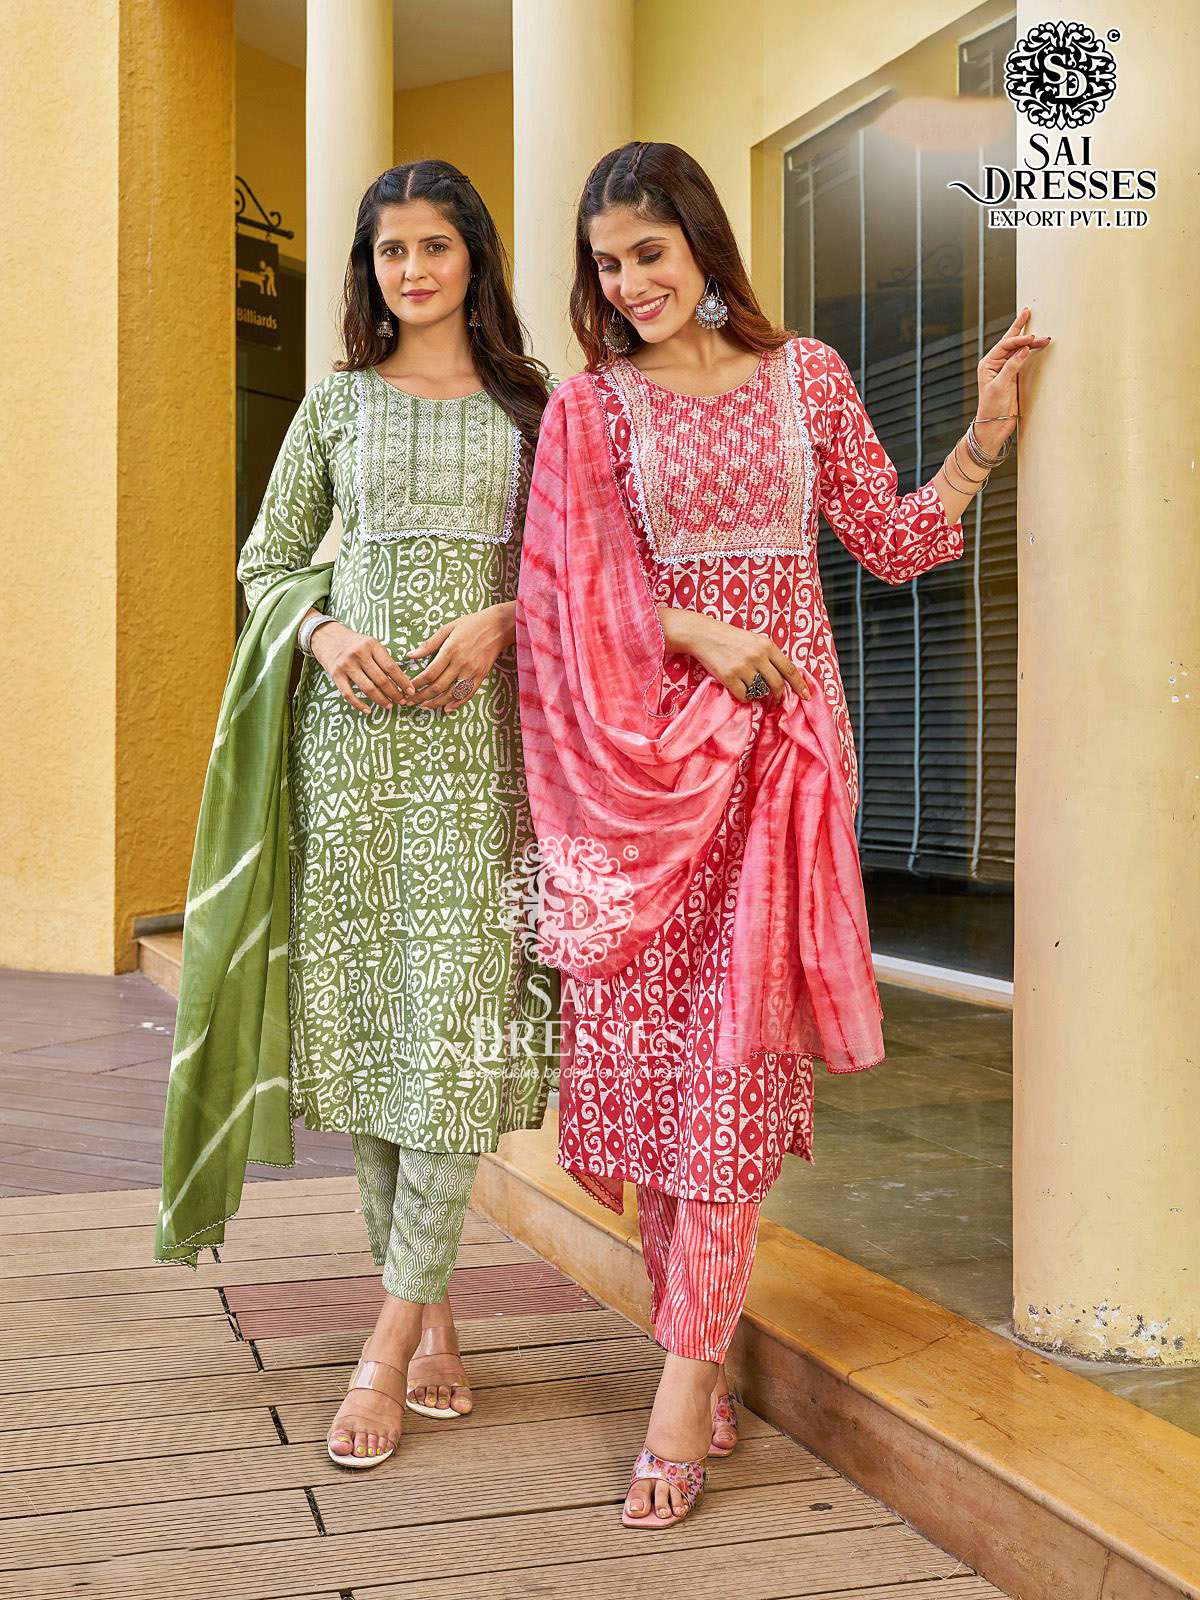 SAI DRESSES PRESENT APSARA READY TO WEAR PANT STYLE DESIGNER 3 PIECE SUITS IN WHOLESALE RATE IN SURAT